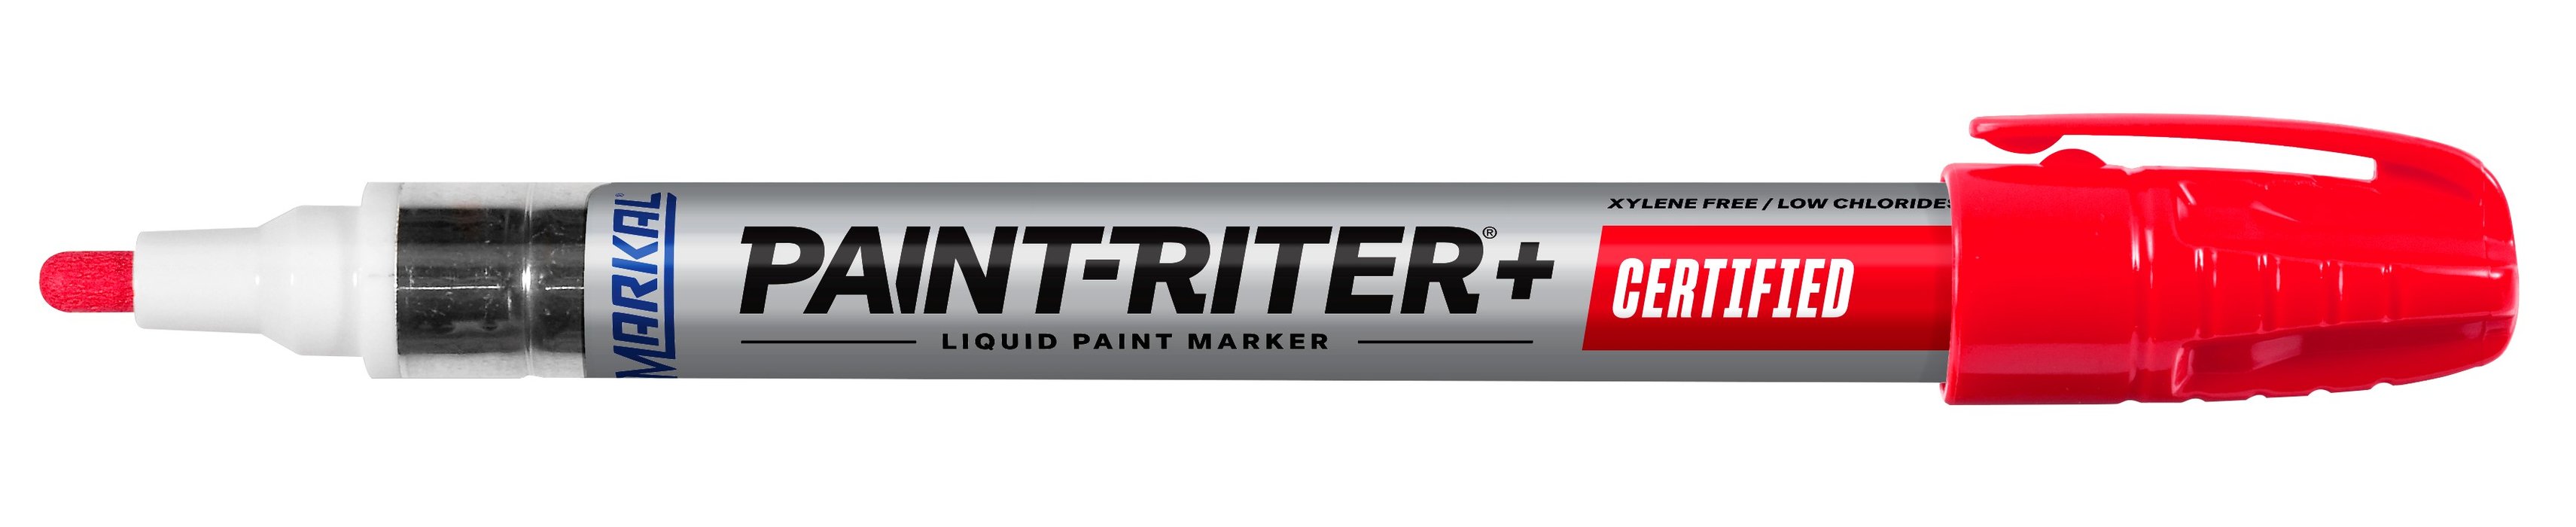 PAINT-RITER VALVE ACTION CERTIFIED